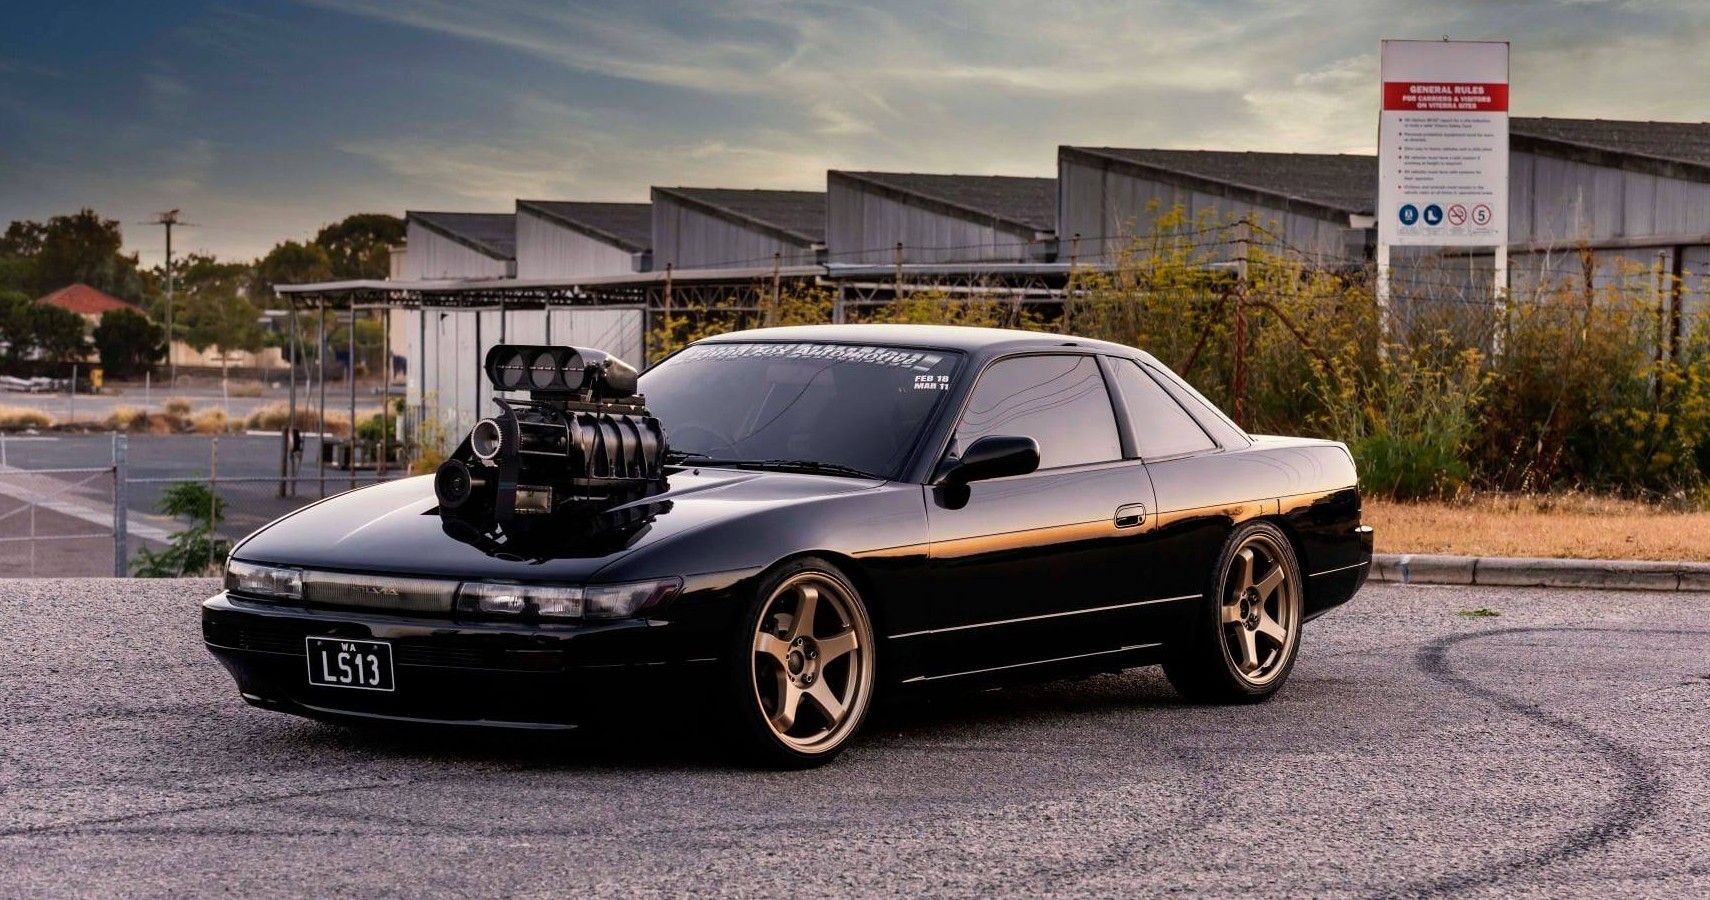 This crazy swap totally transforms the 4-cylinder import car